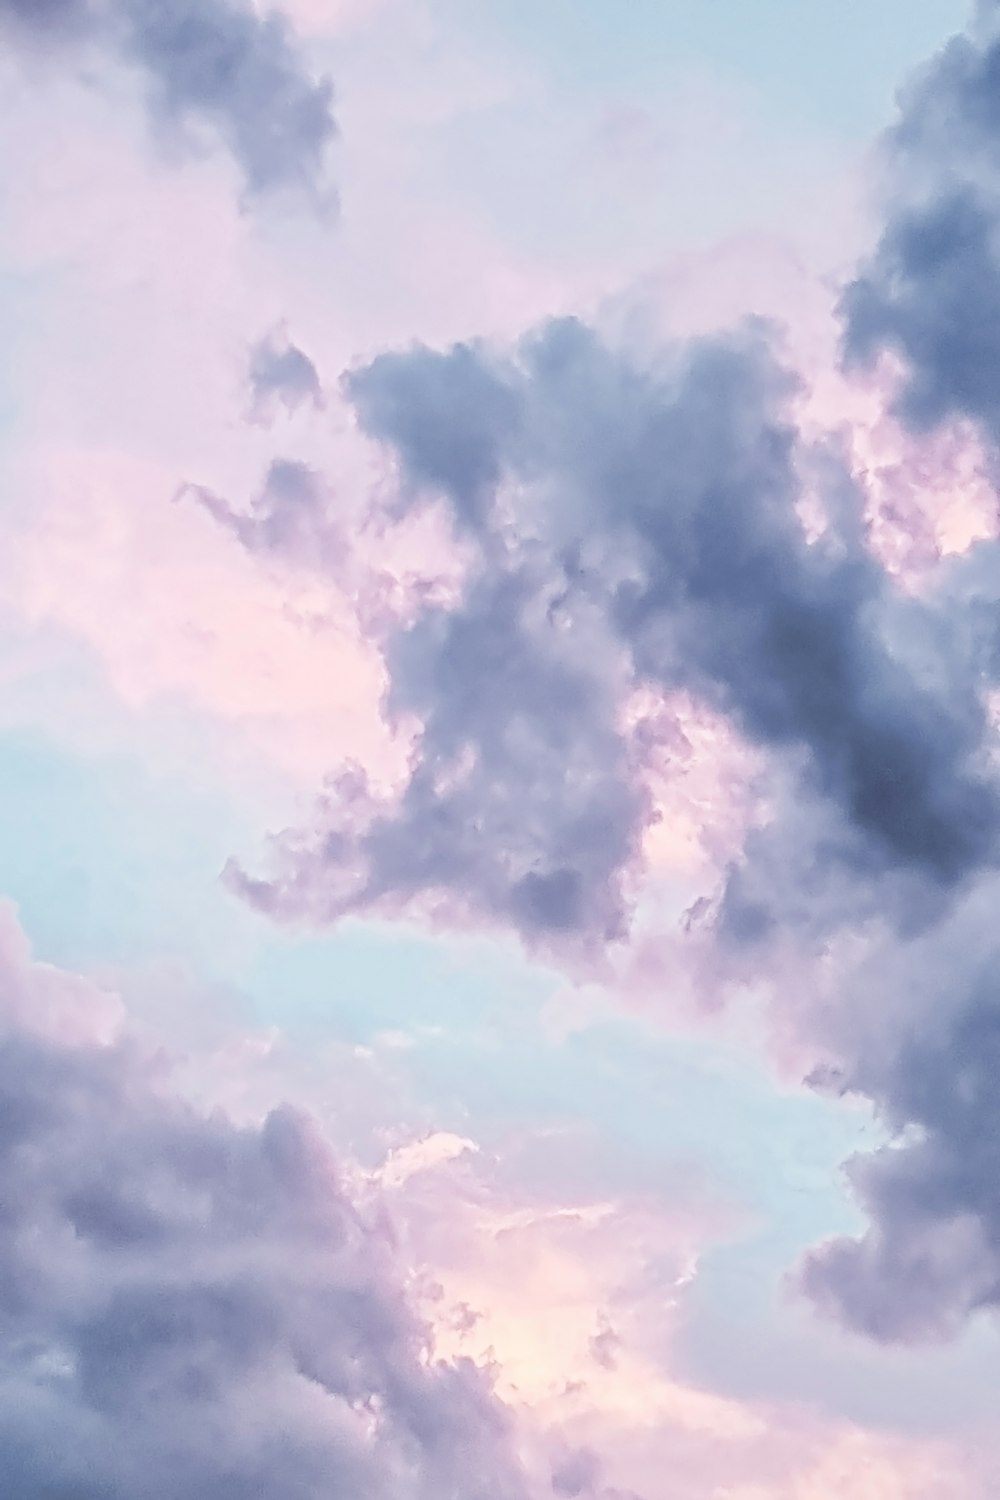 cloud, soft and aesthetics - image #6280027 on